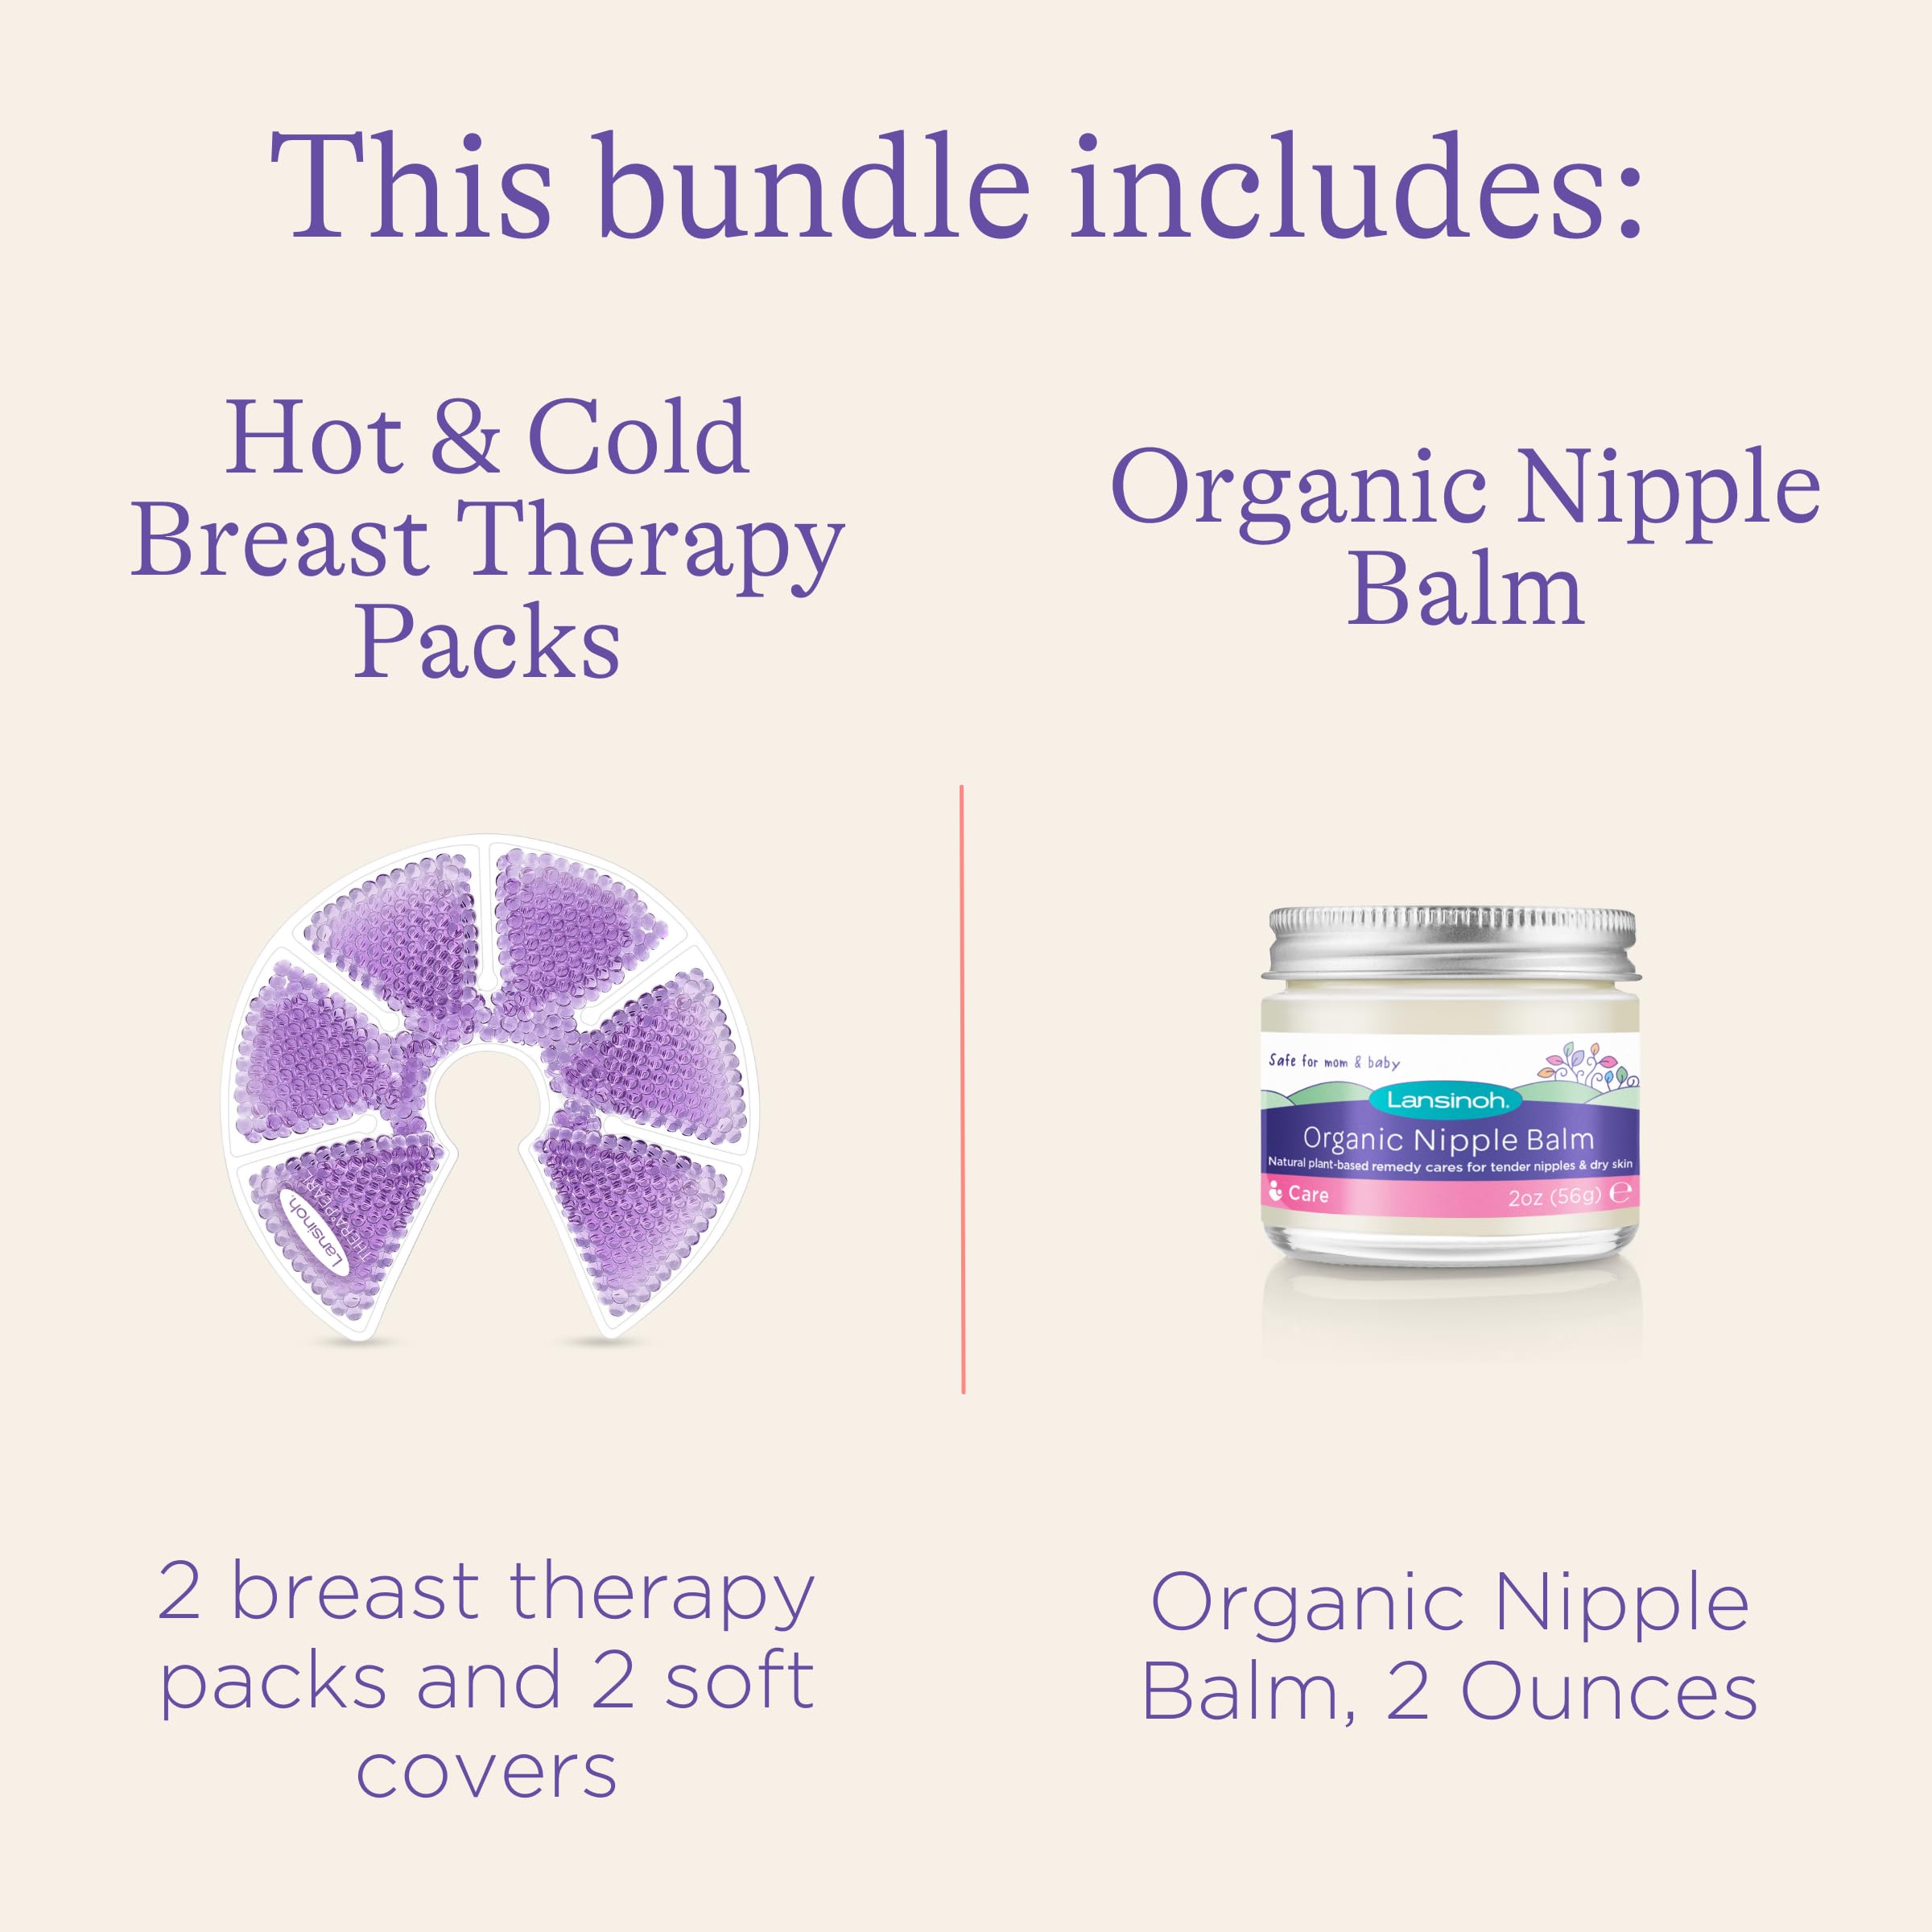 Lansinoh Breast Therapy Packs with Soft Covers, 2 Pack, and Organic Nipple Balm, 2 Ounces, Breastfeeding Essentials for Moms